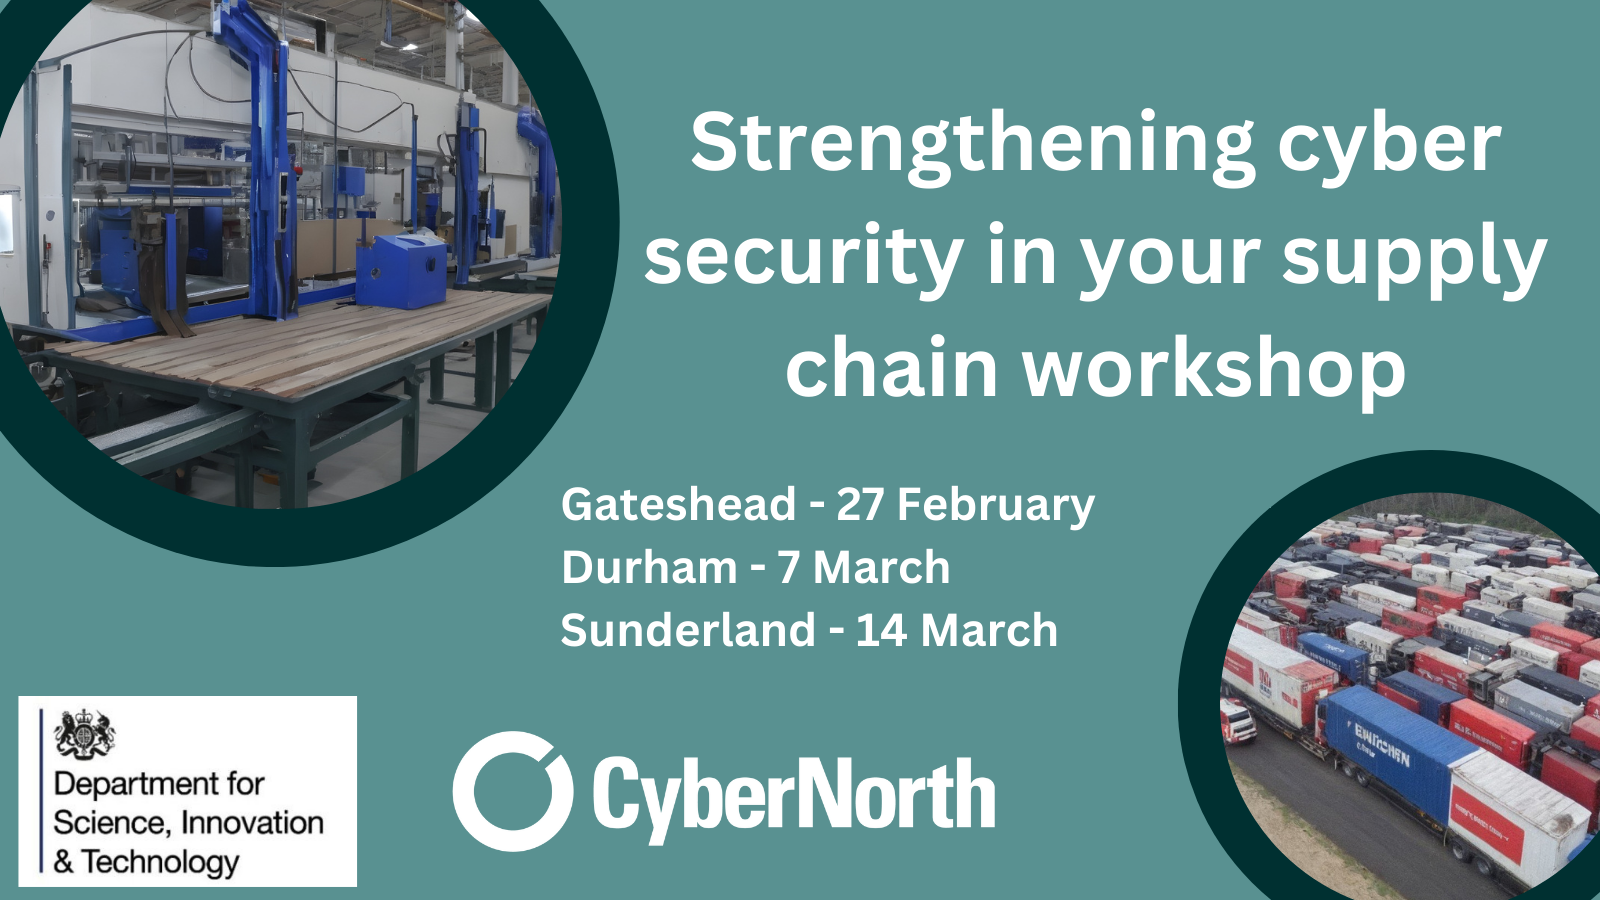 Strengthening cyber security in your supply chain workshop